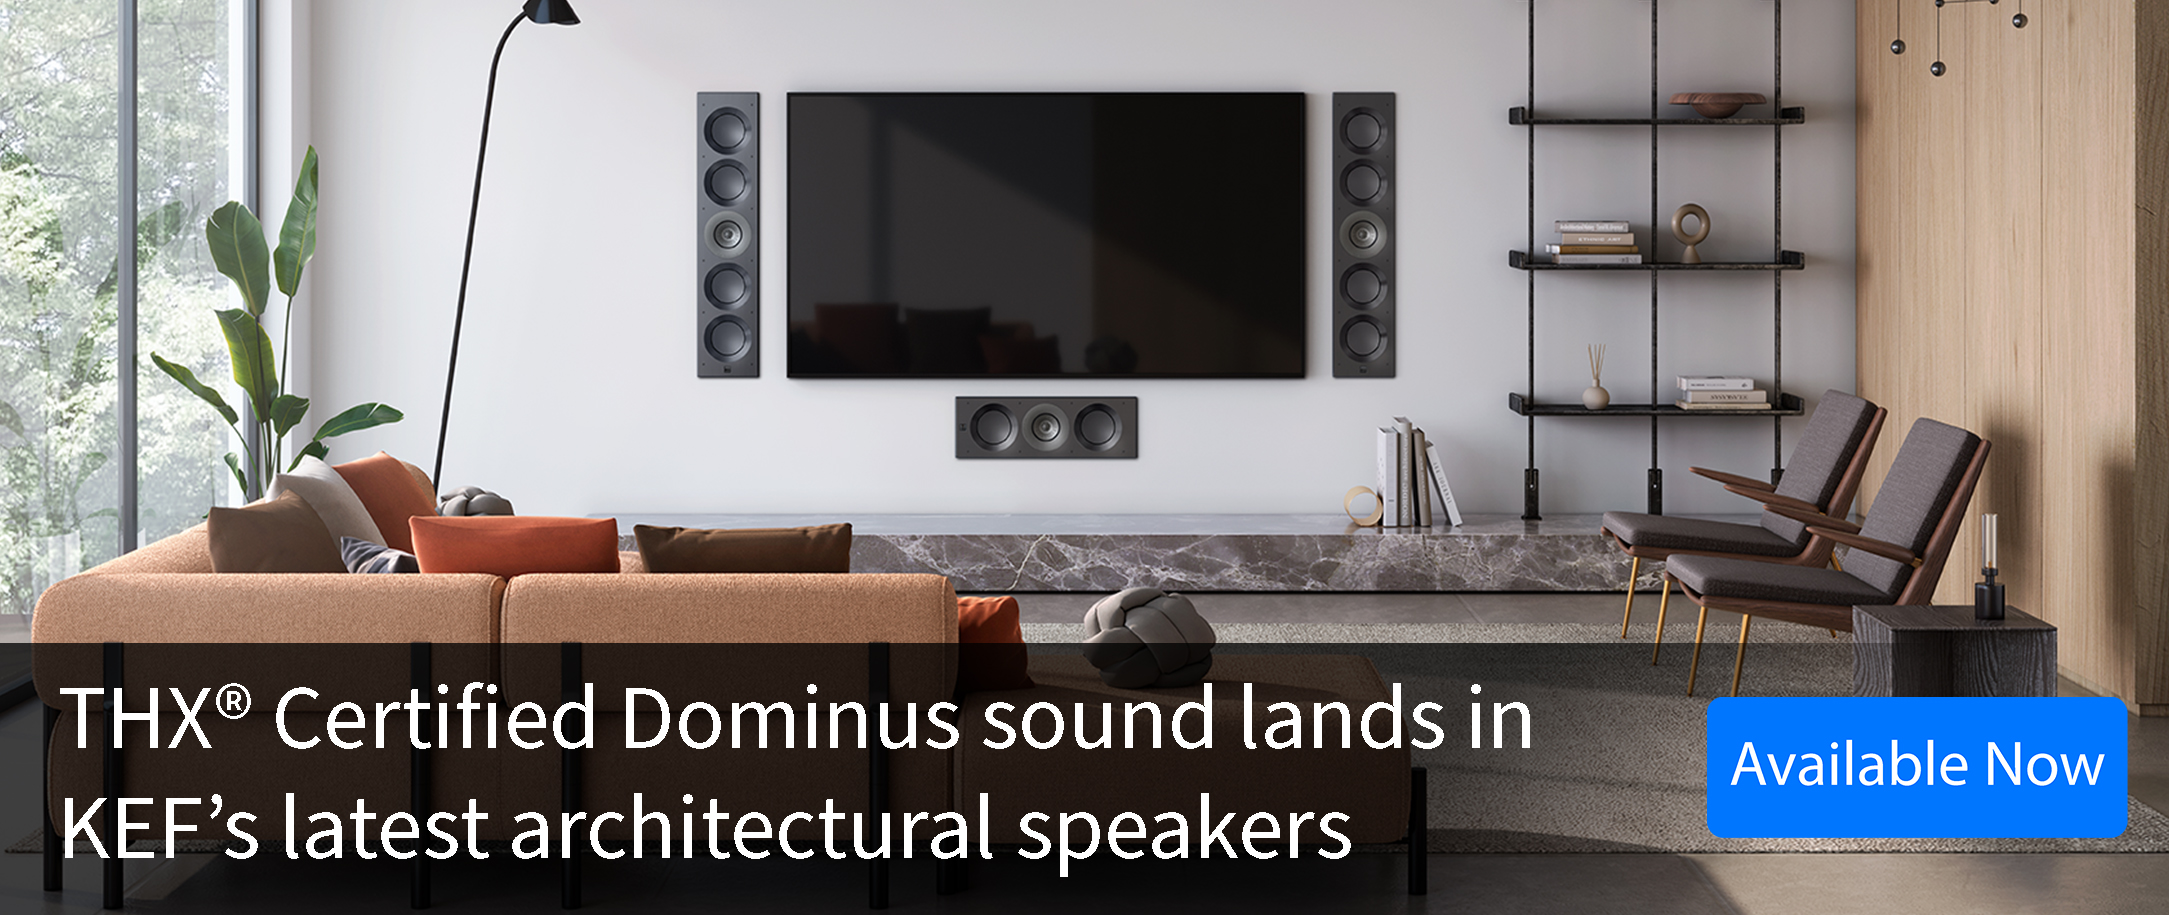 A living room with KEF's THX Certified Dominus architectural speakers